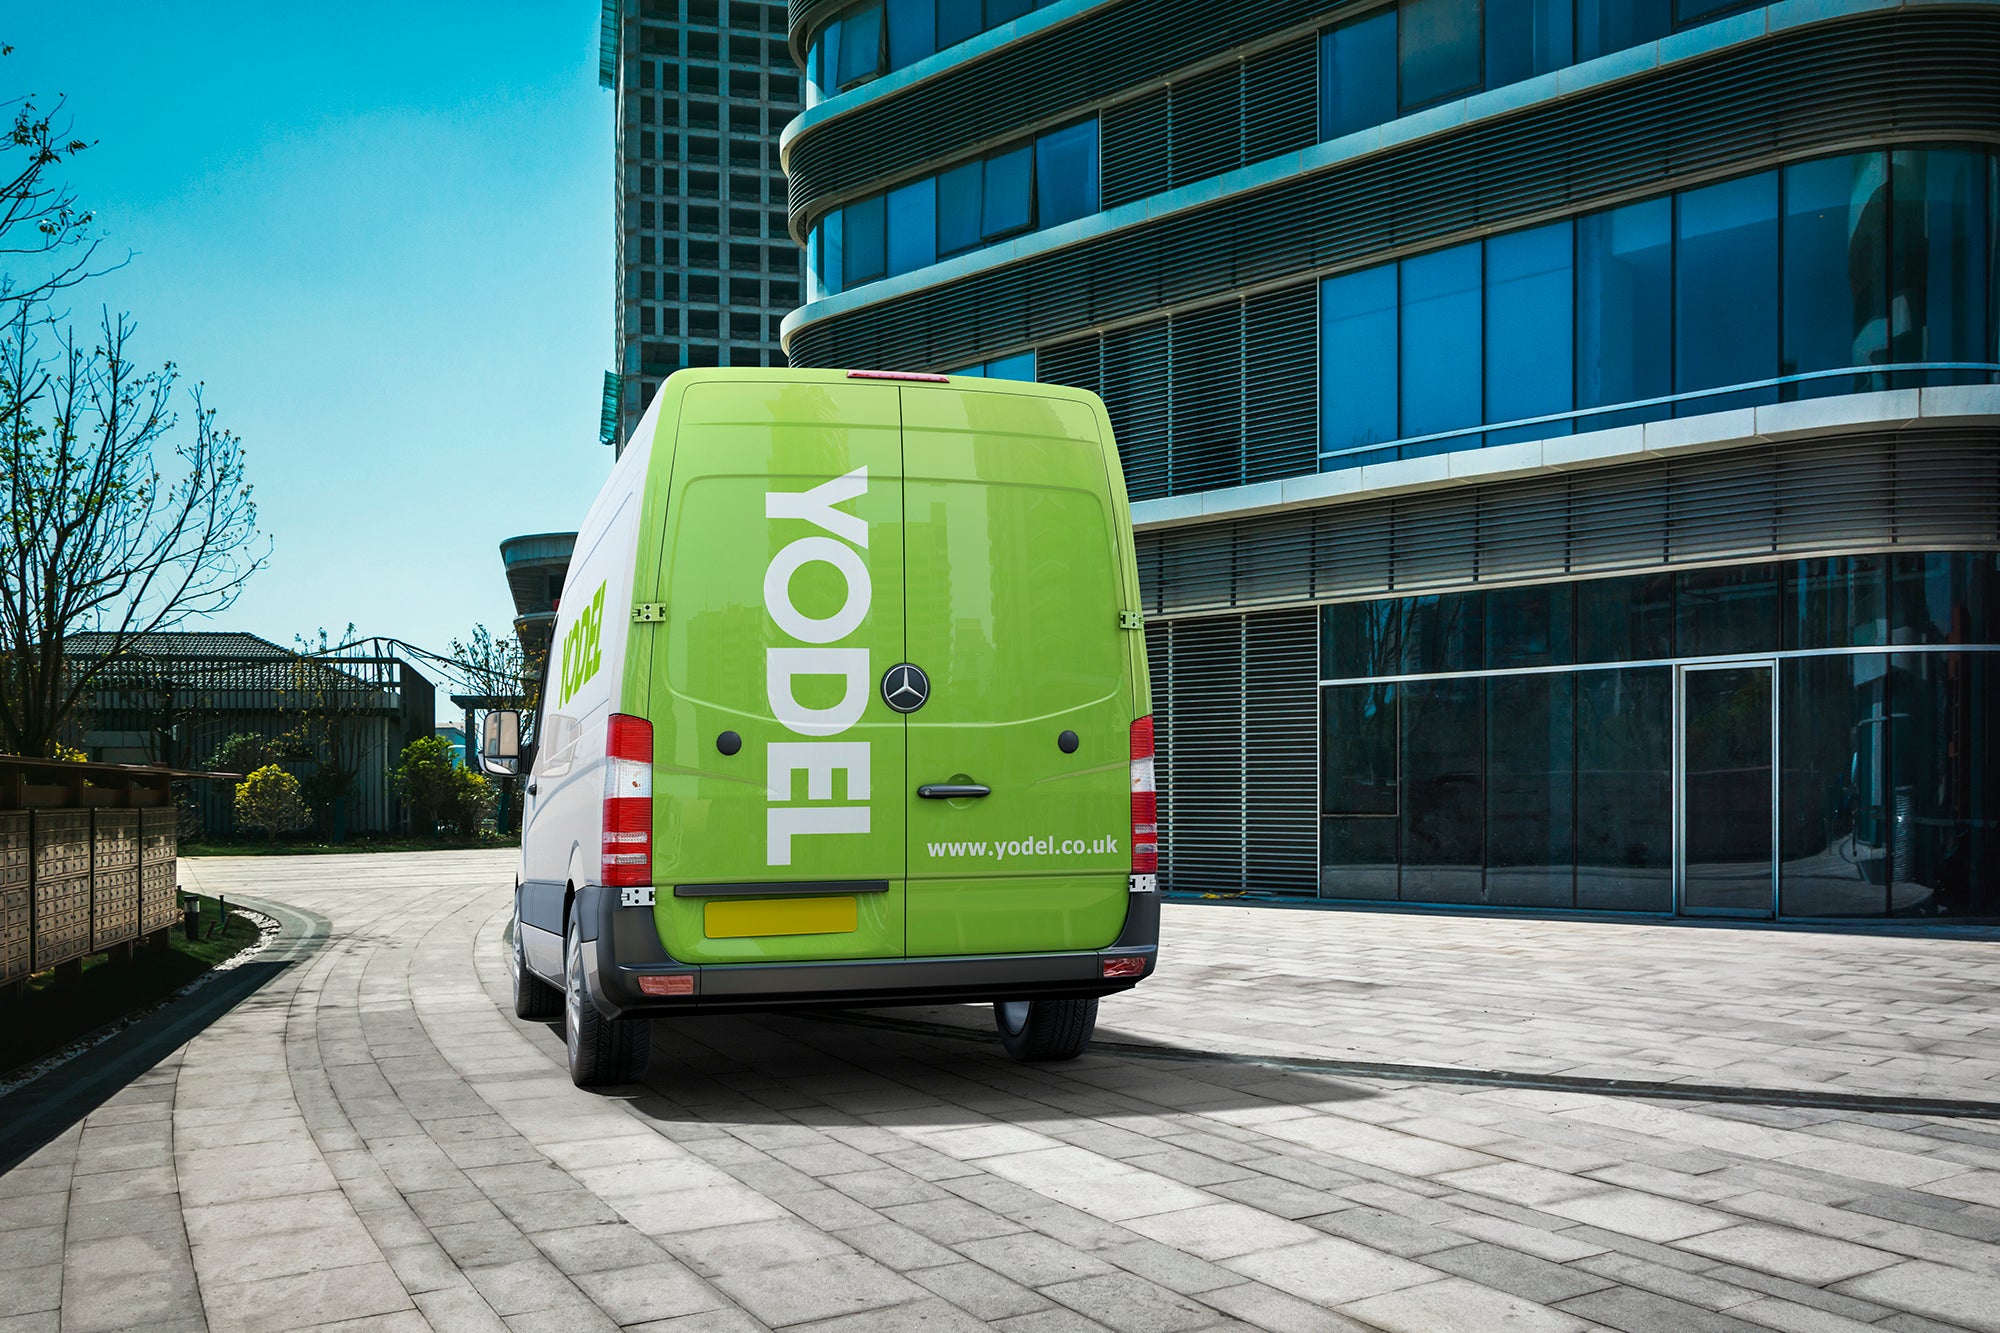 Yodel has experienced significant growth in the last five years